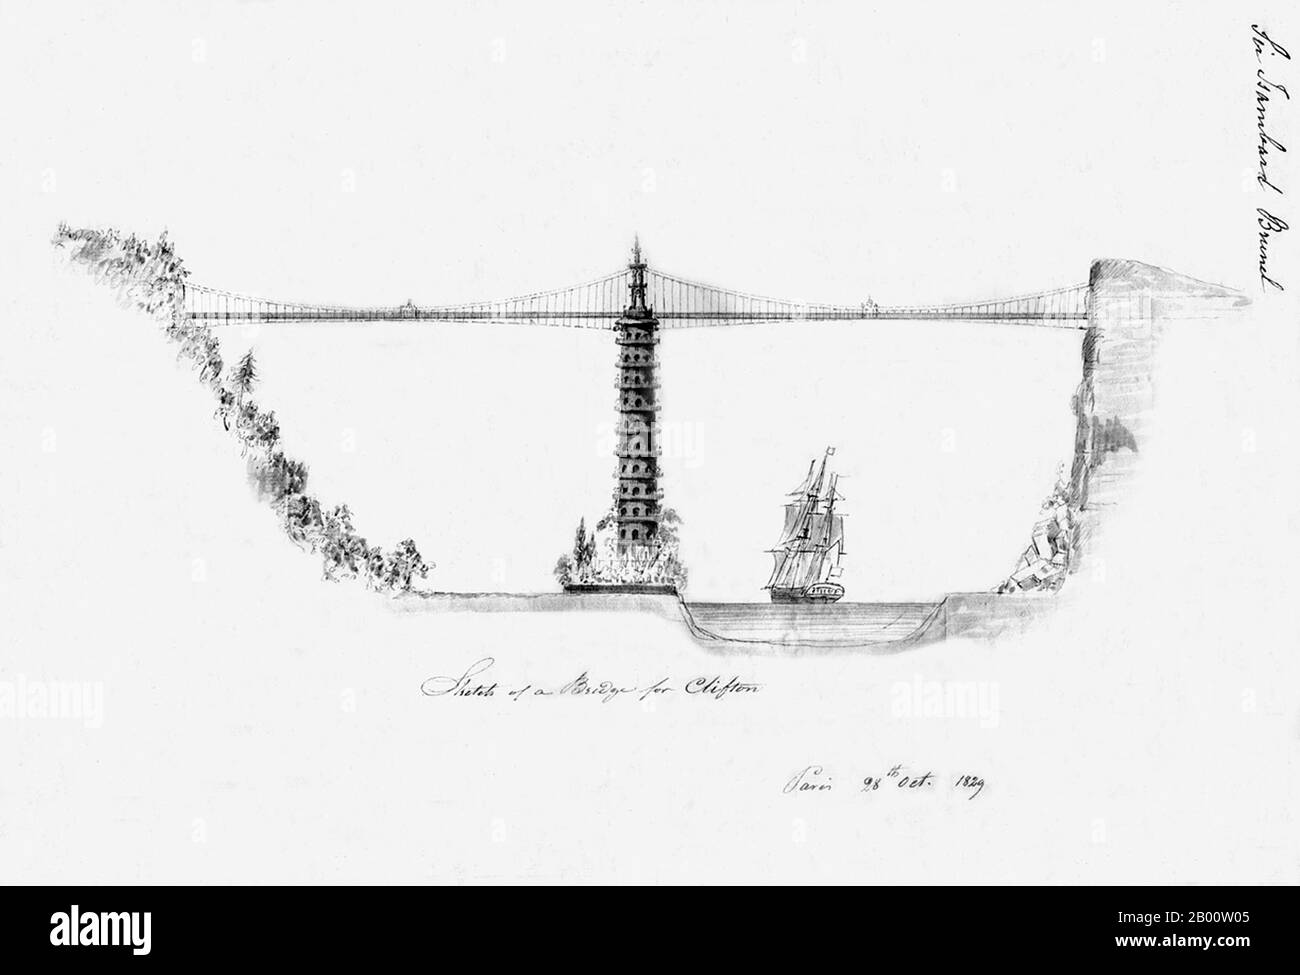 A remarkable design for a 'Chinoiserie' bridge across the Avon Gorge at Bristol by Sir Isambard Kingdom Brunel, 1829. The Clifton Suspension Bridge was eventually completed in 1864 after Brunel's design, but without the pagoda. Stock Photo